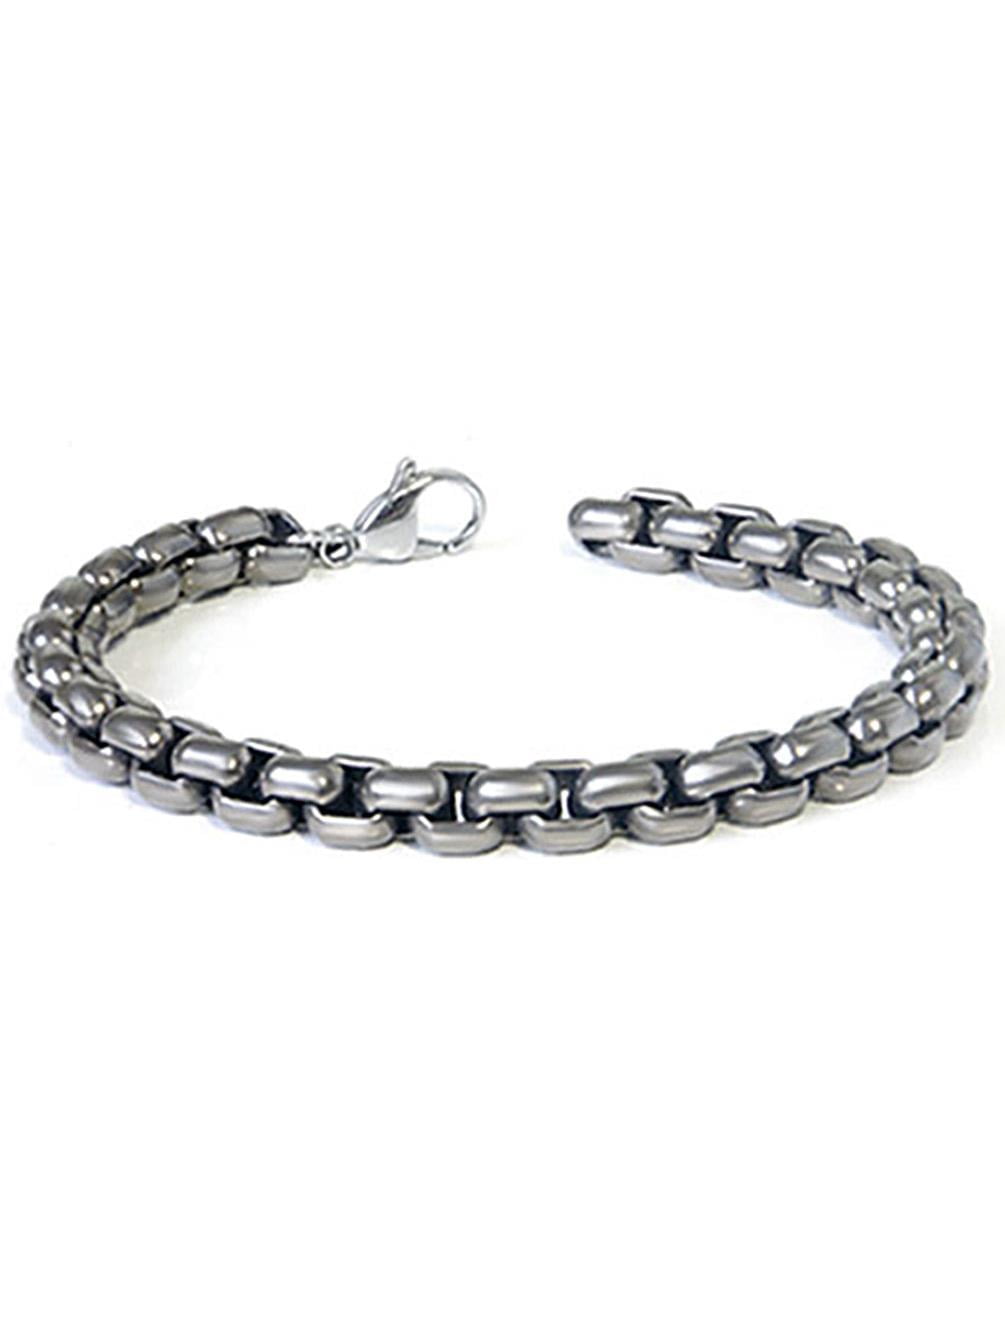 Victoria Kay 1/4ct Black Diamond Magnetic Ball Bracelet in Sterling Silver  : Amazon.ca: Clothing, Shoes & Accessories